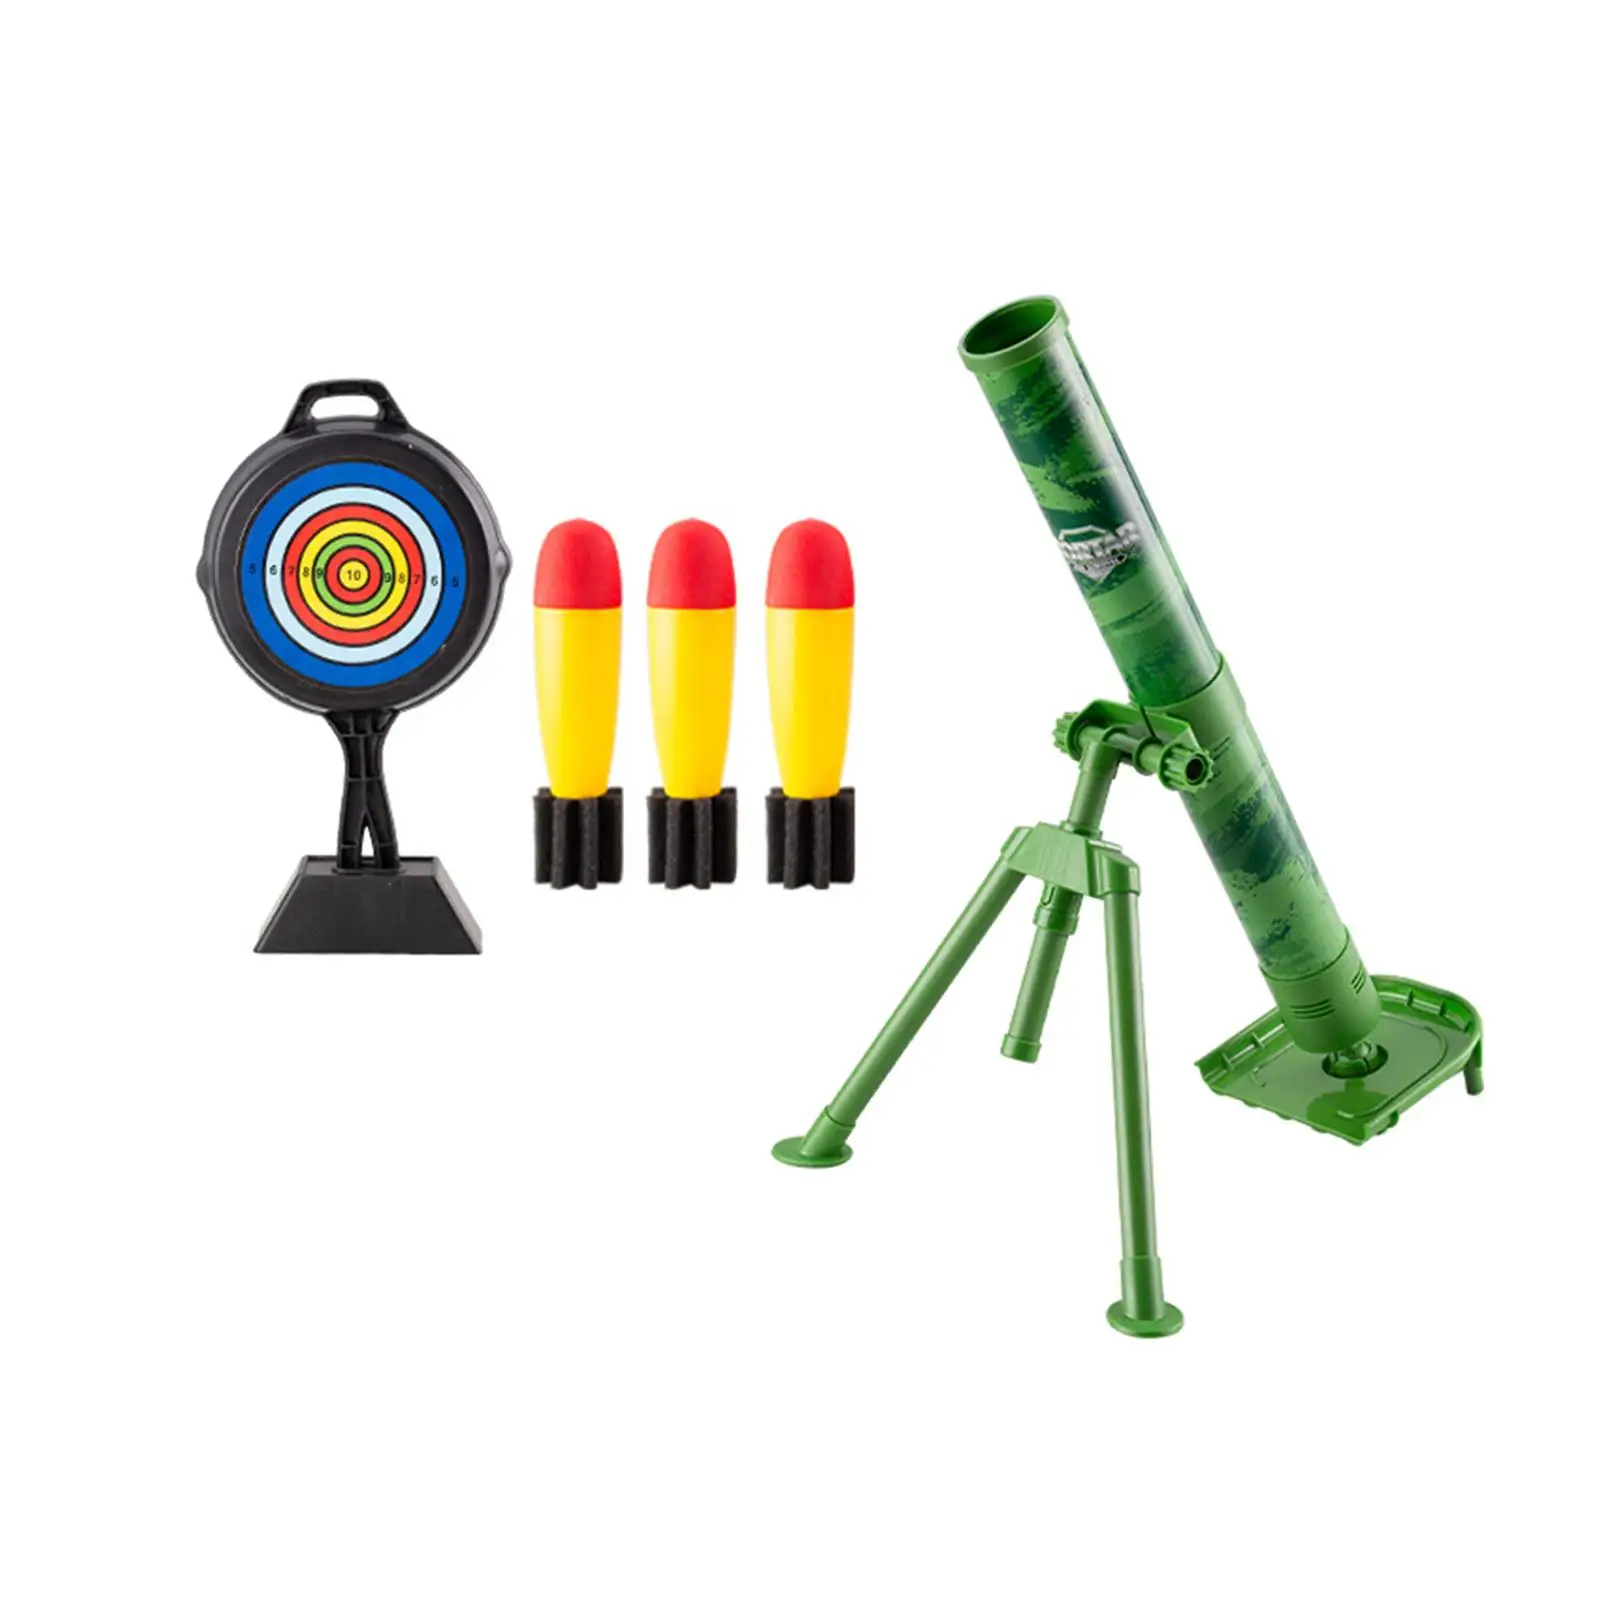 Mortar Launcher Toy Set Loading Bucket Chase Rocket for Kids Birthday Gifts